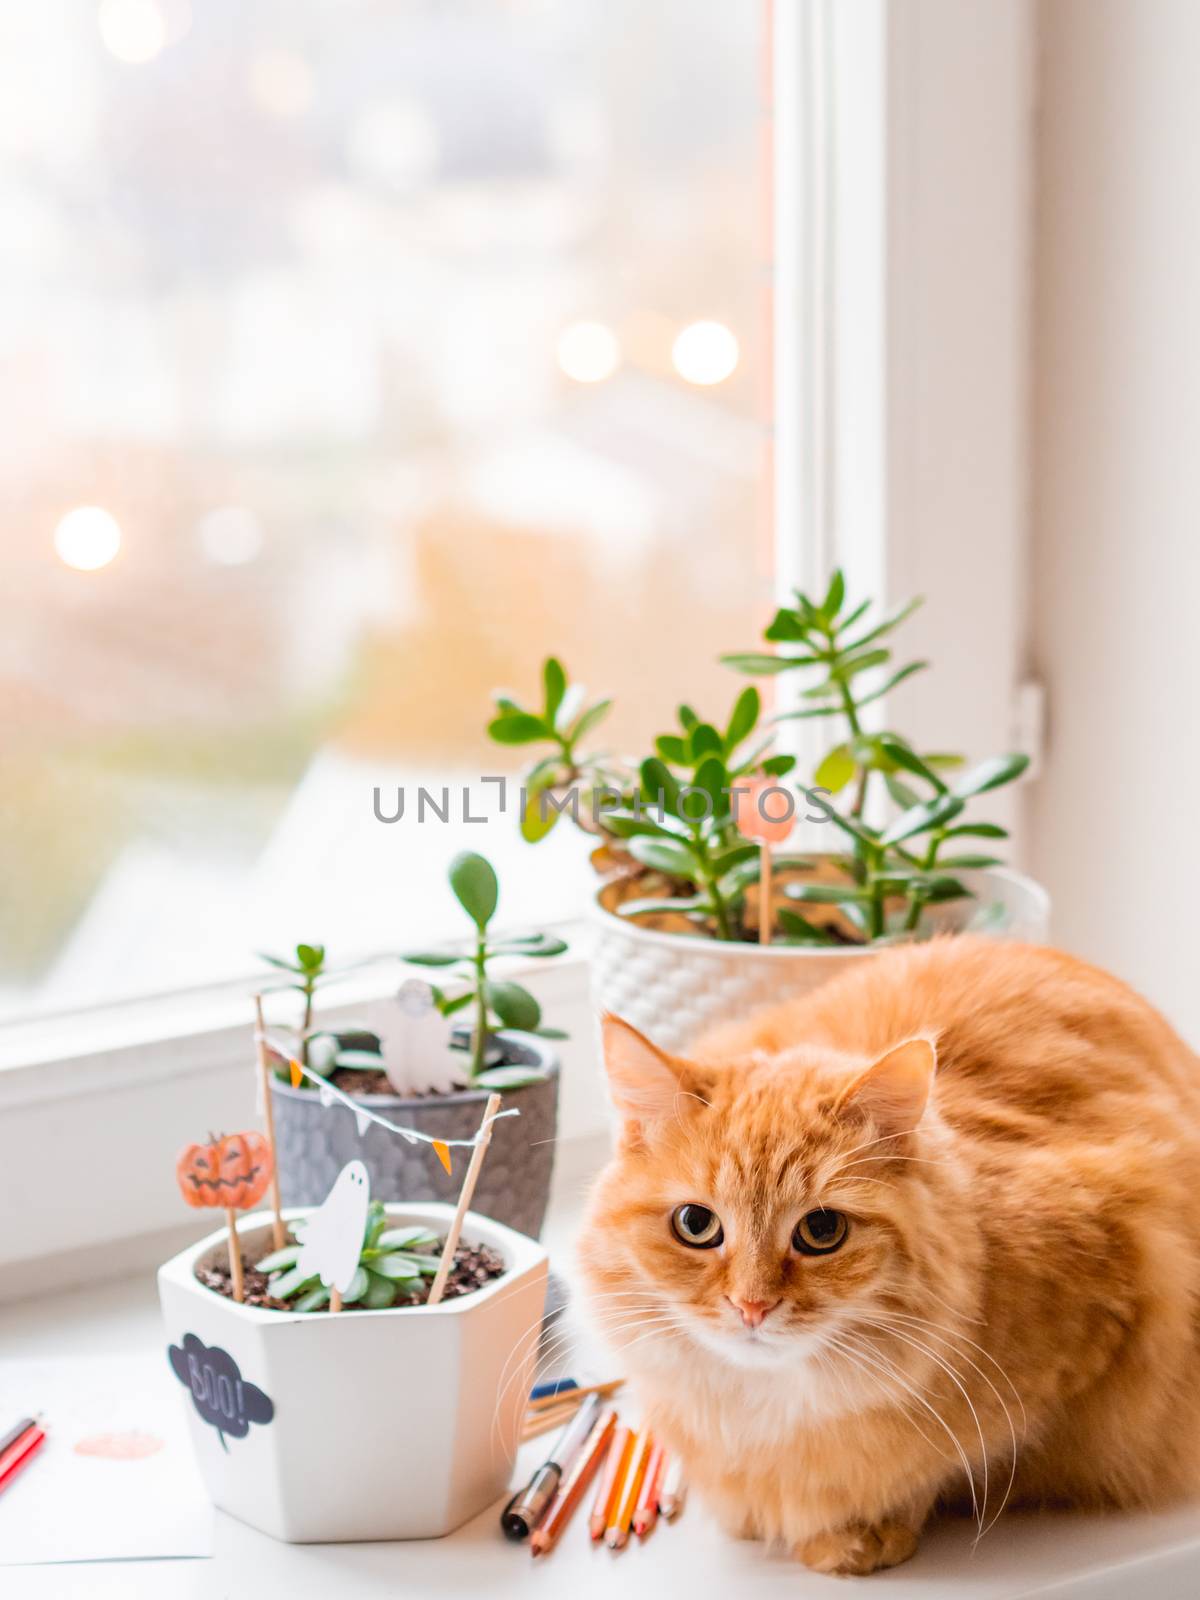 Cute ginger cat and flower pots with handmade decorations for Ha by aksenovko